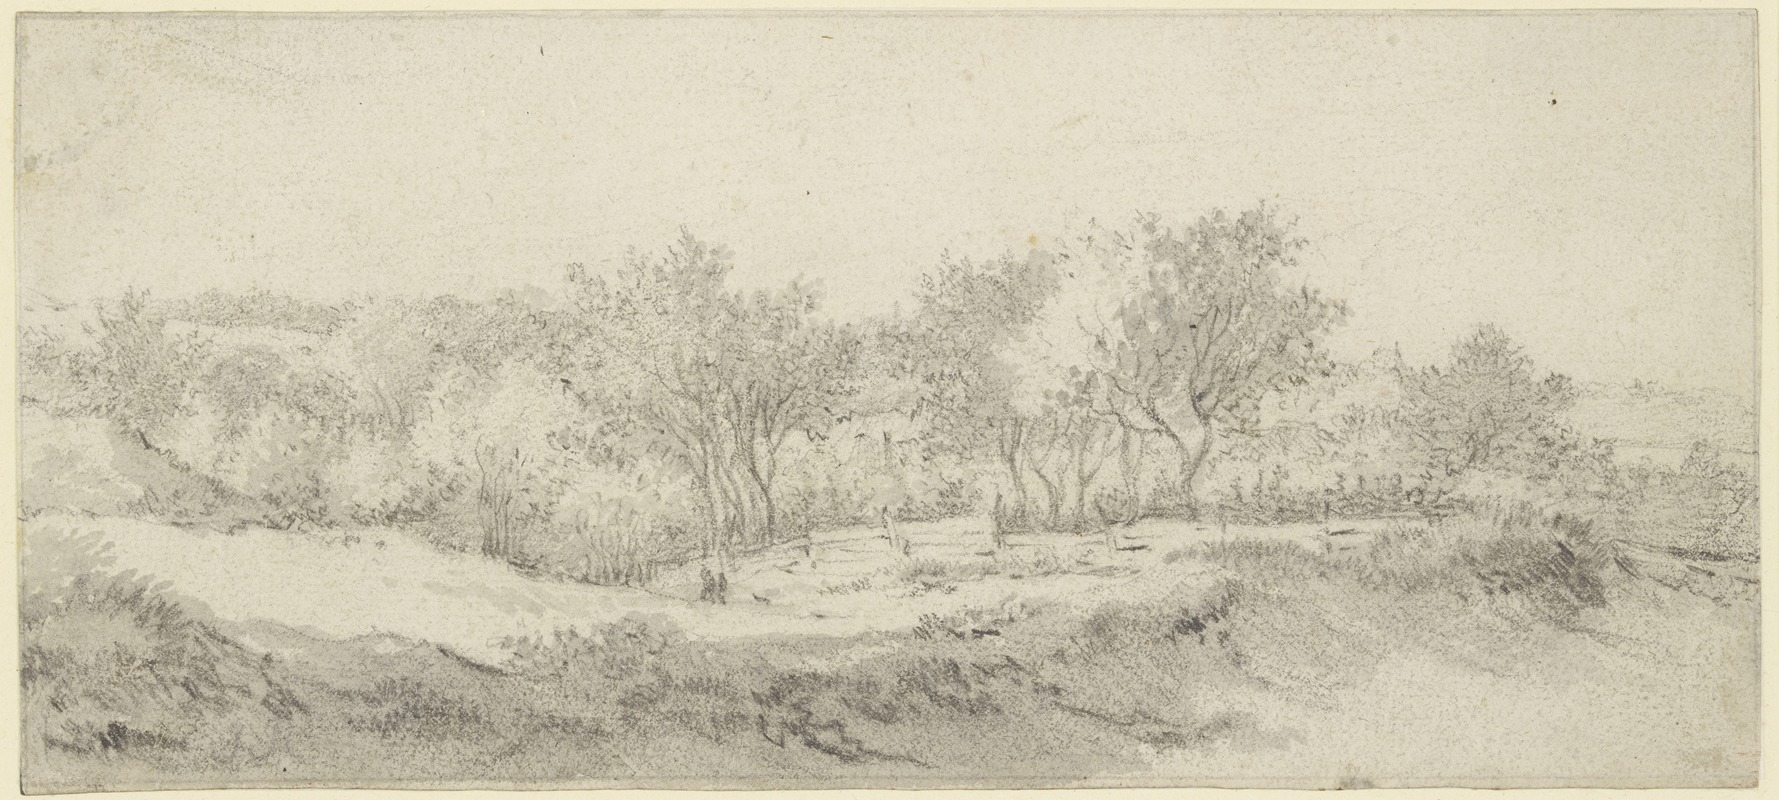 Jacob van Ruisdael - Small section of a tree with a fence